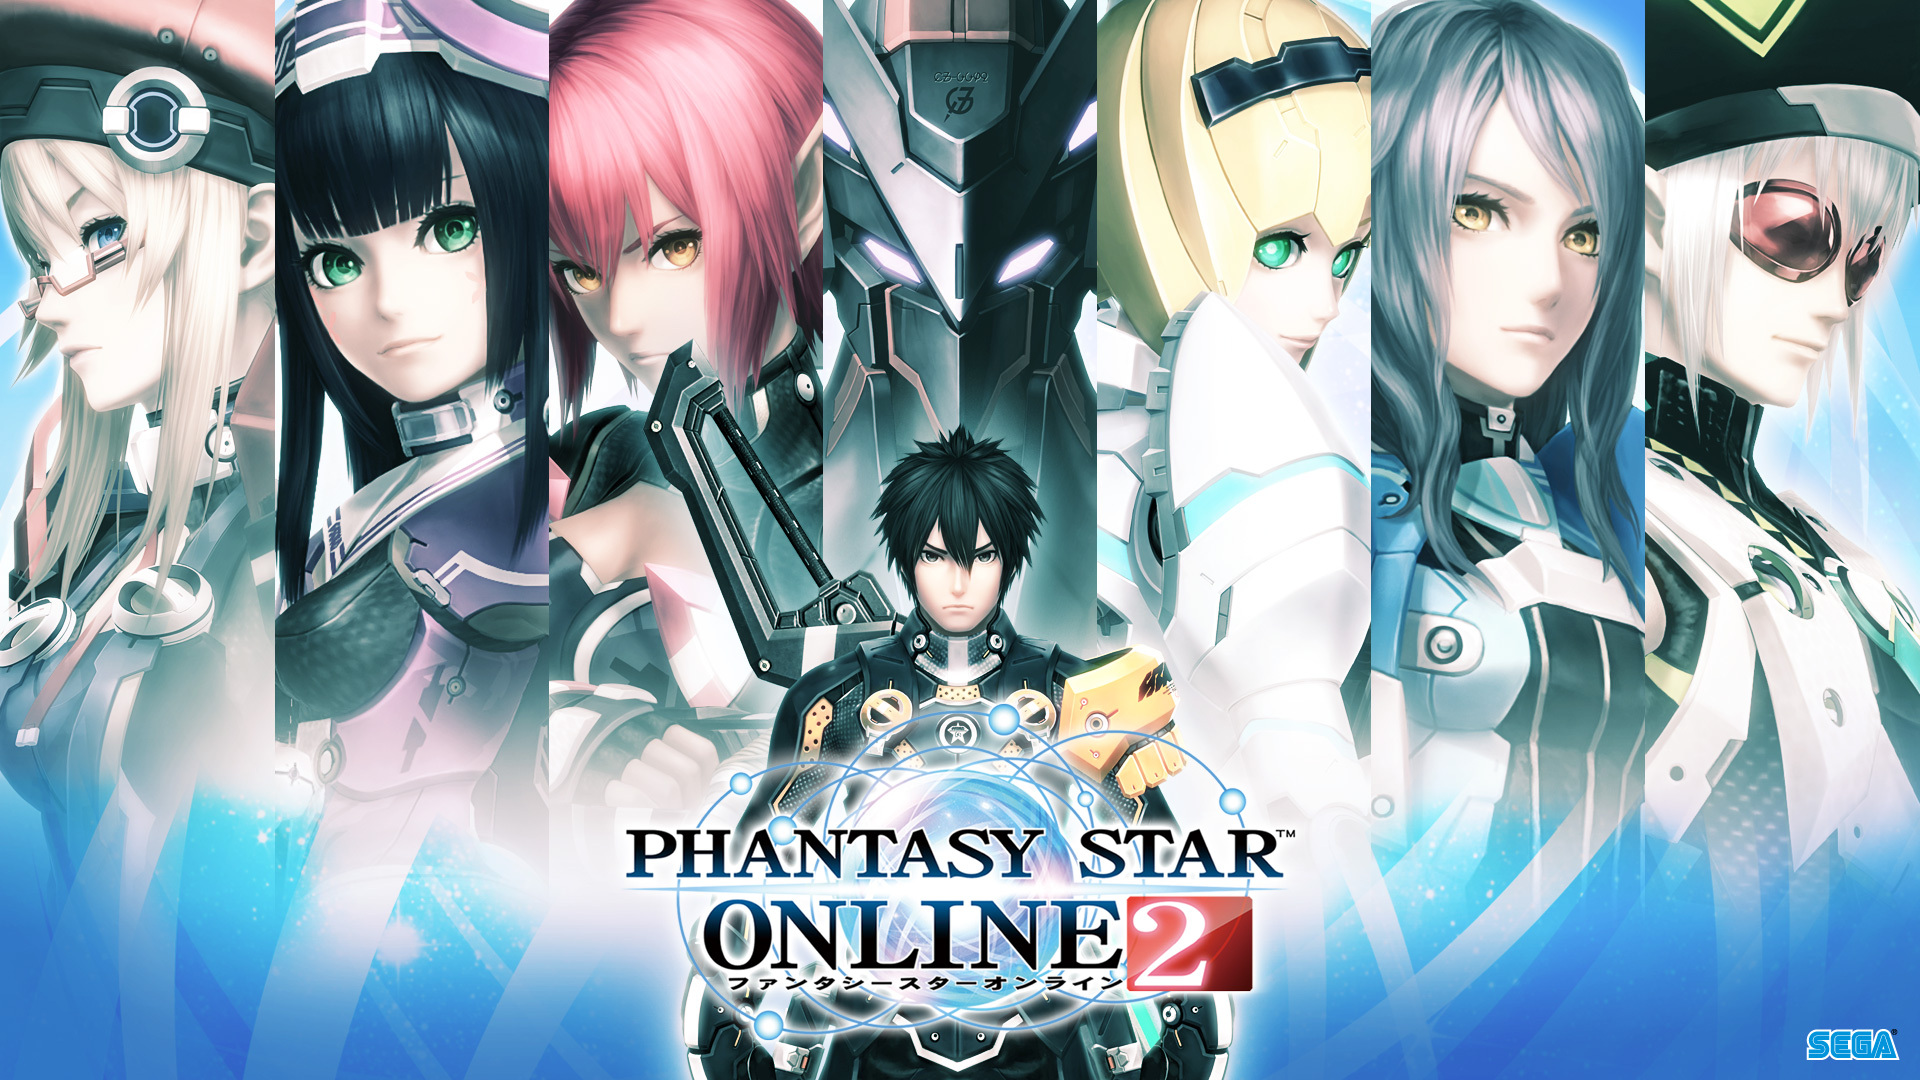 [PRESS RELEASE] English Service of Phantasy Star Online 2 will Open on May 29